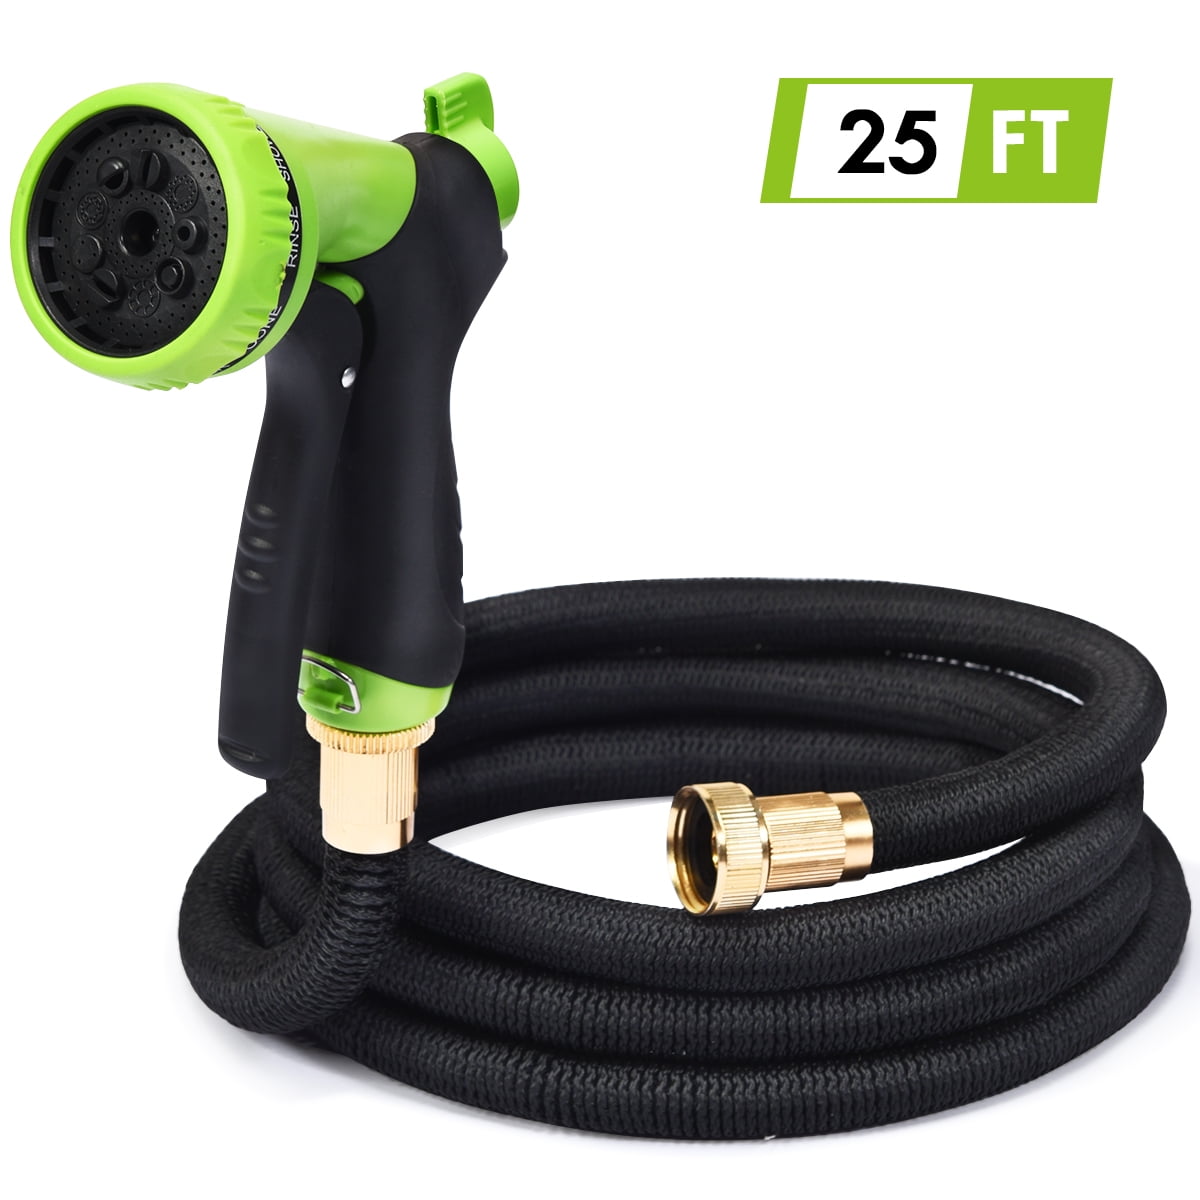 Lightweight & No-Kink Flexible Garden Hose 3/4 inch Solid Brass Fittings and Double Latex Core Flexi Hose with 8 Function Nozzle Expandable Garden Hose 75 ft Green Black